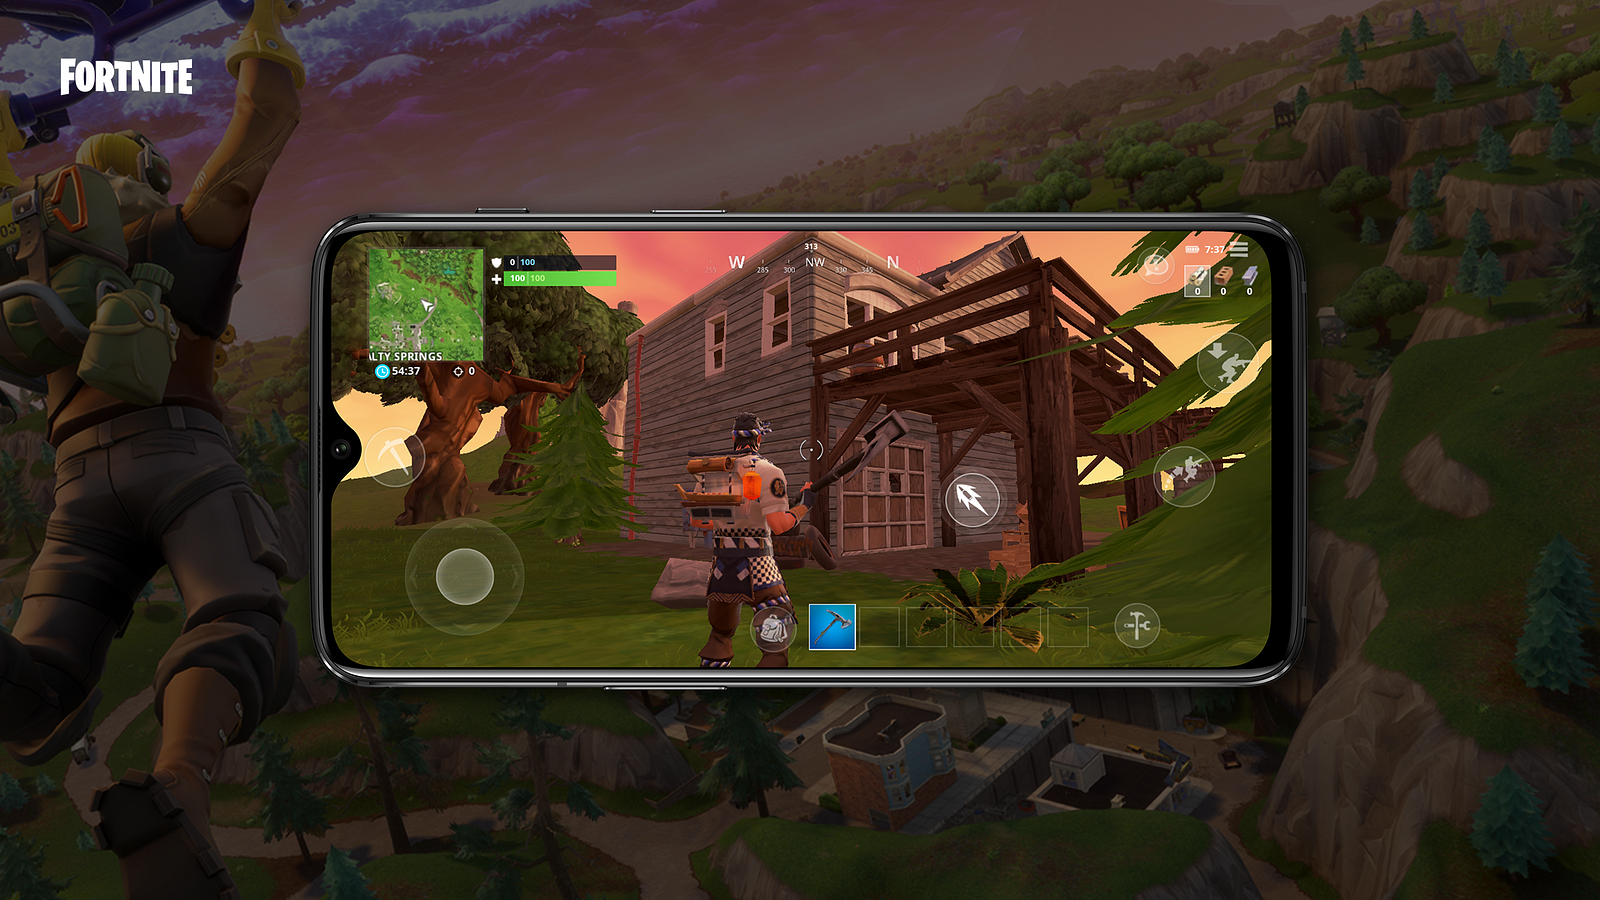 are you ready to claim victory on the bus check out fortnite on the oneplus 6t today - games like fortnite online no download